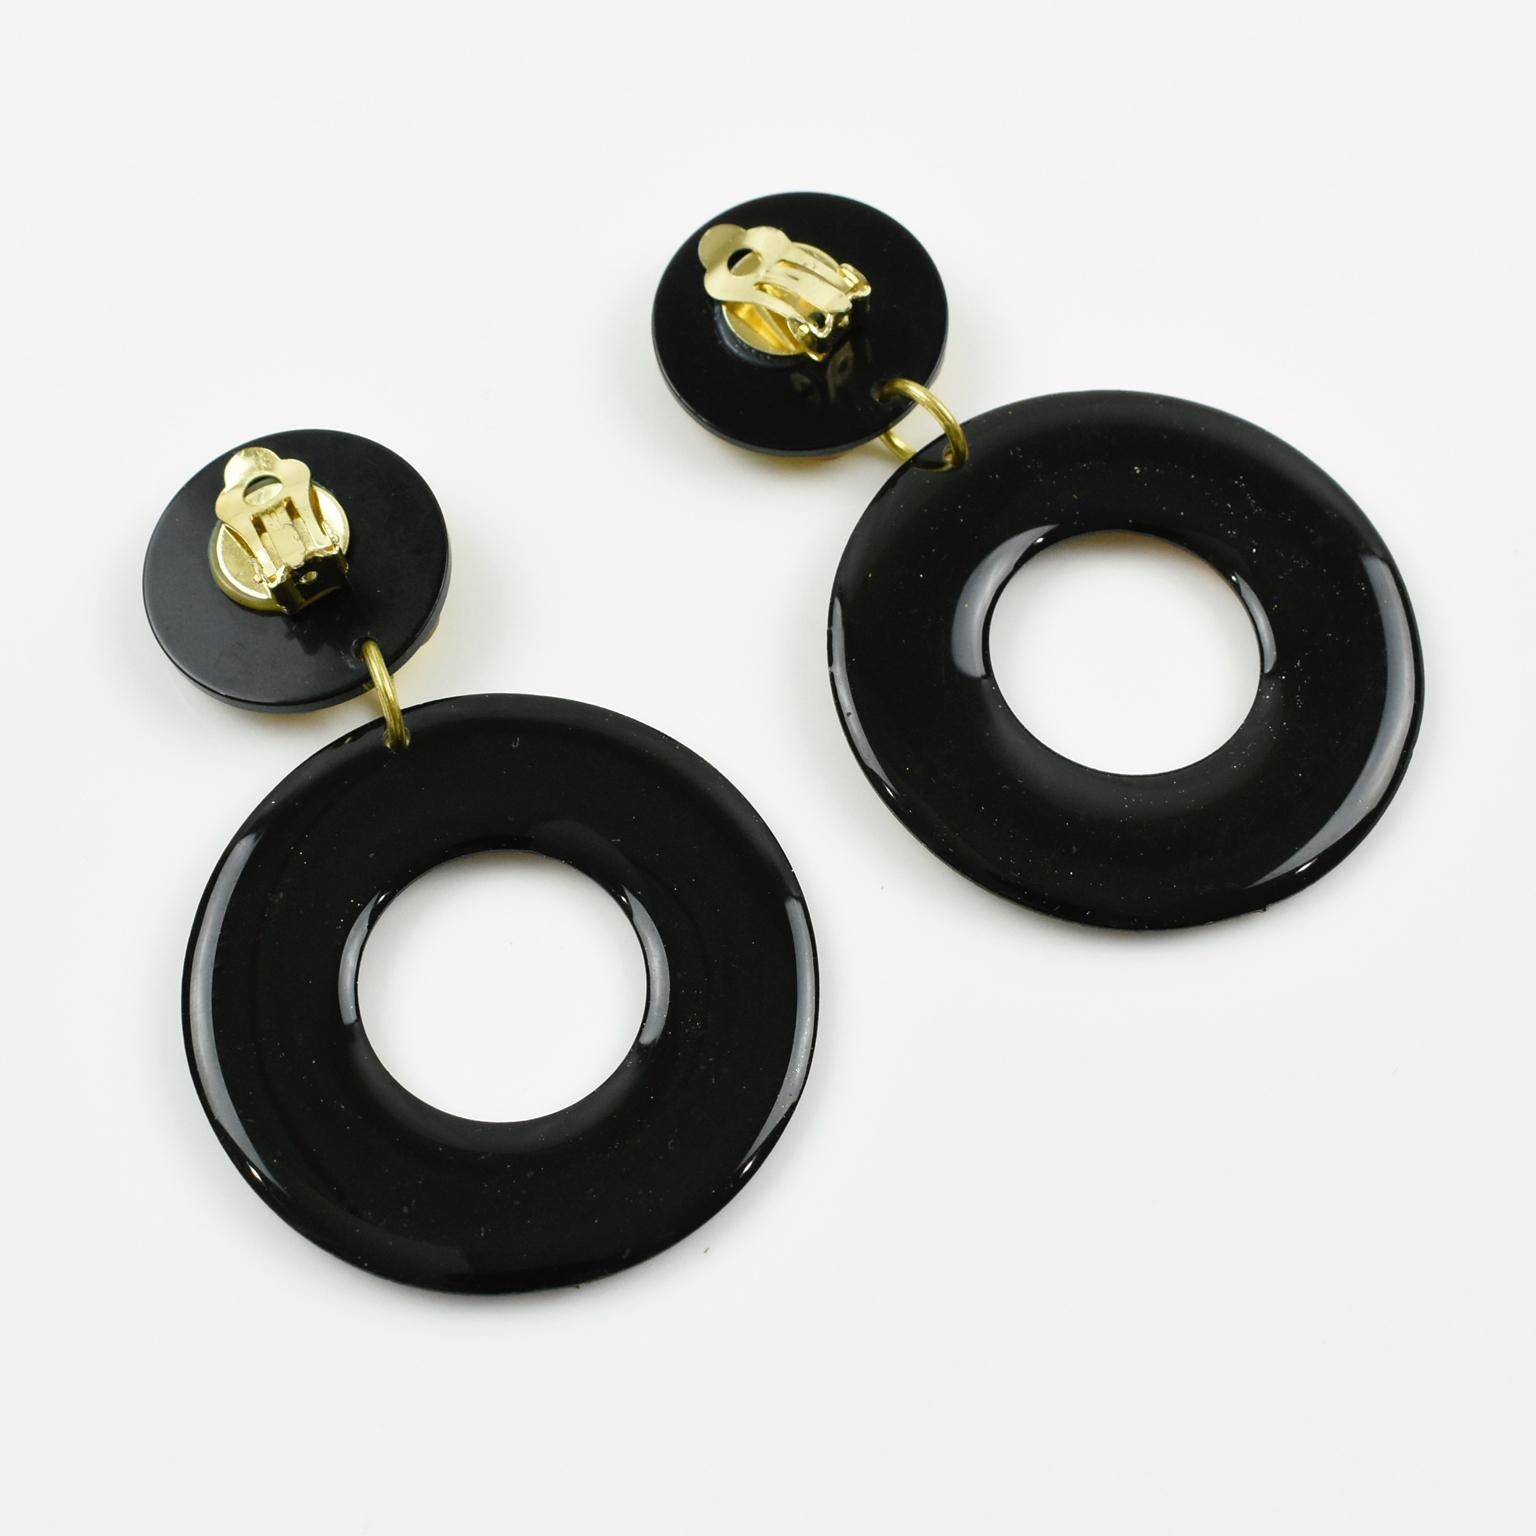 Baroque Dangle Lucite Clip Earrings Black and Gold Design In Excellent Condition For Sale In Atlanta, GA